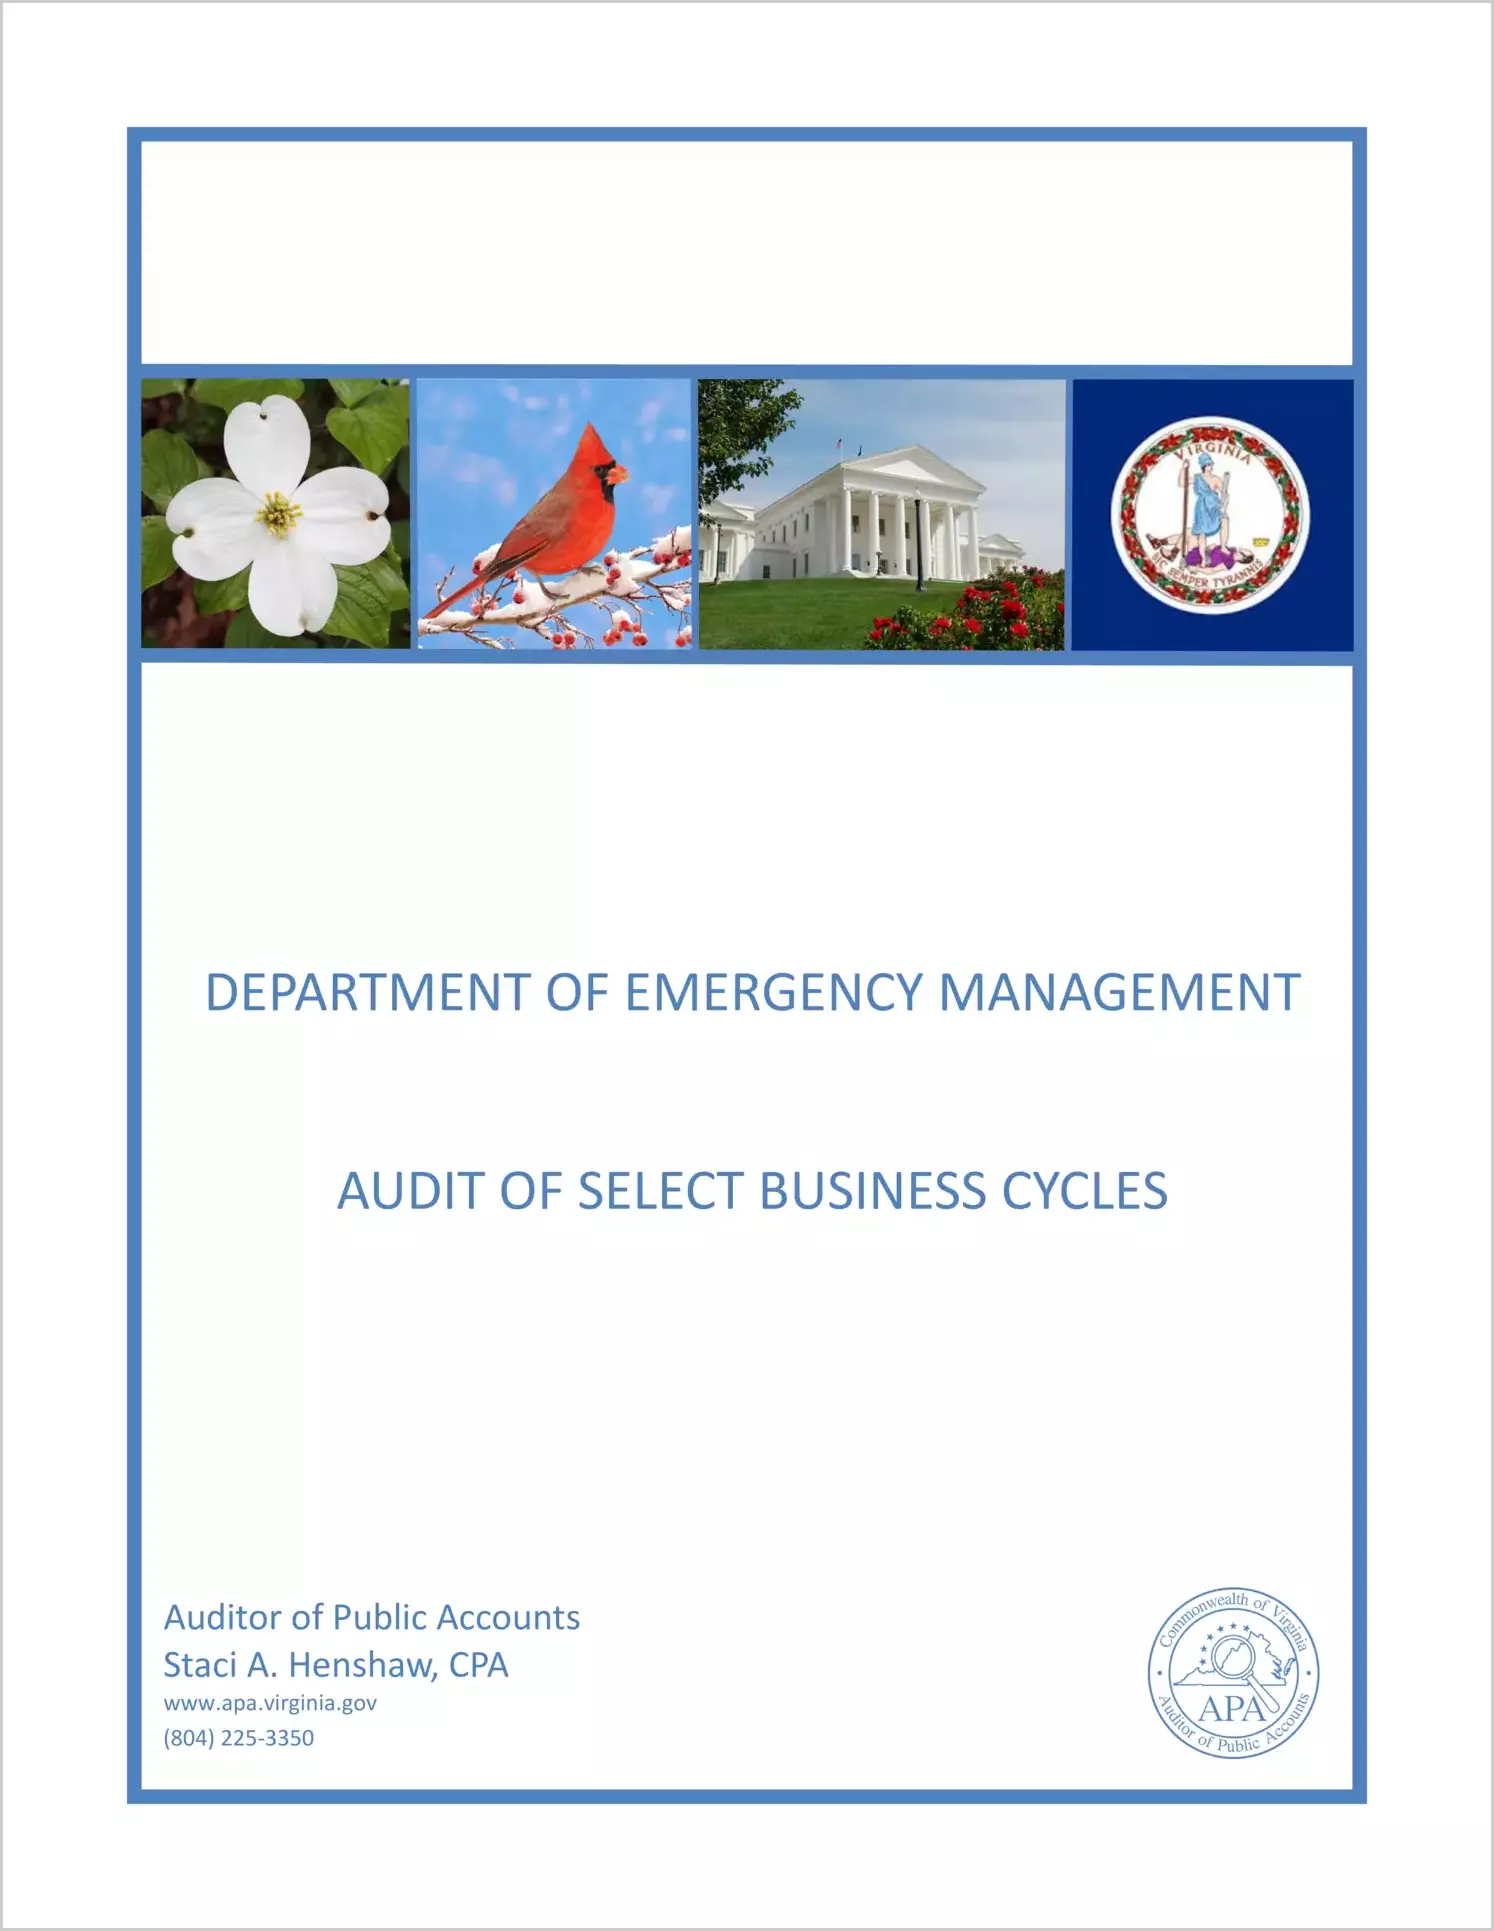 Department of Emergency Management Audit of Select Business Cycles